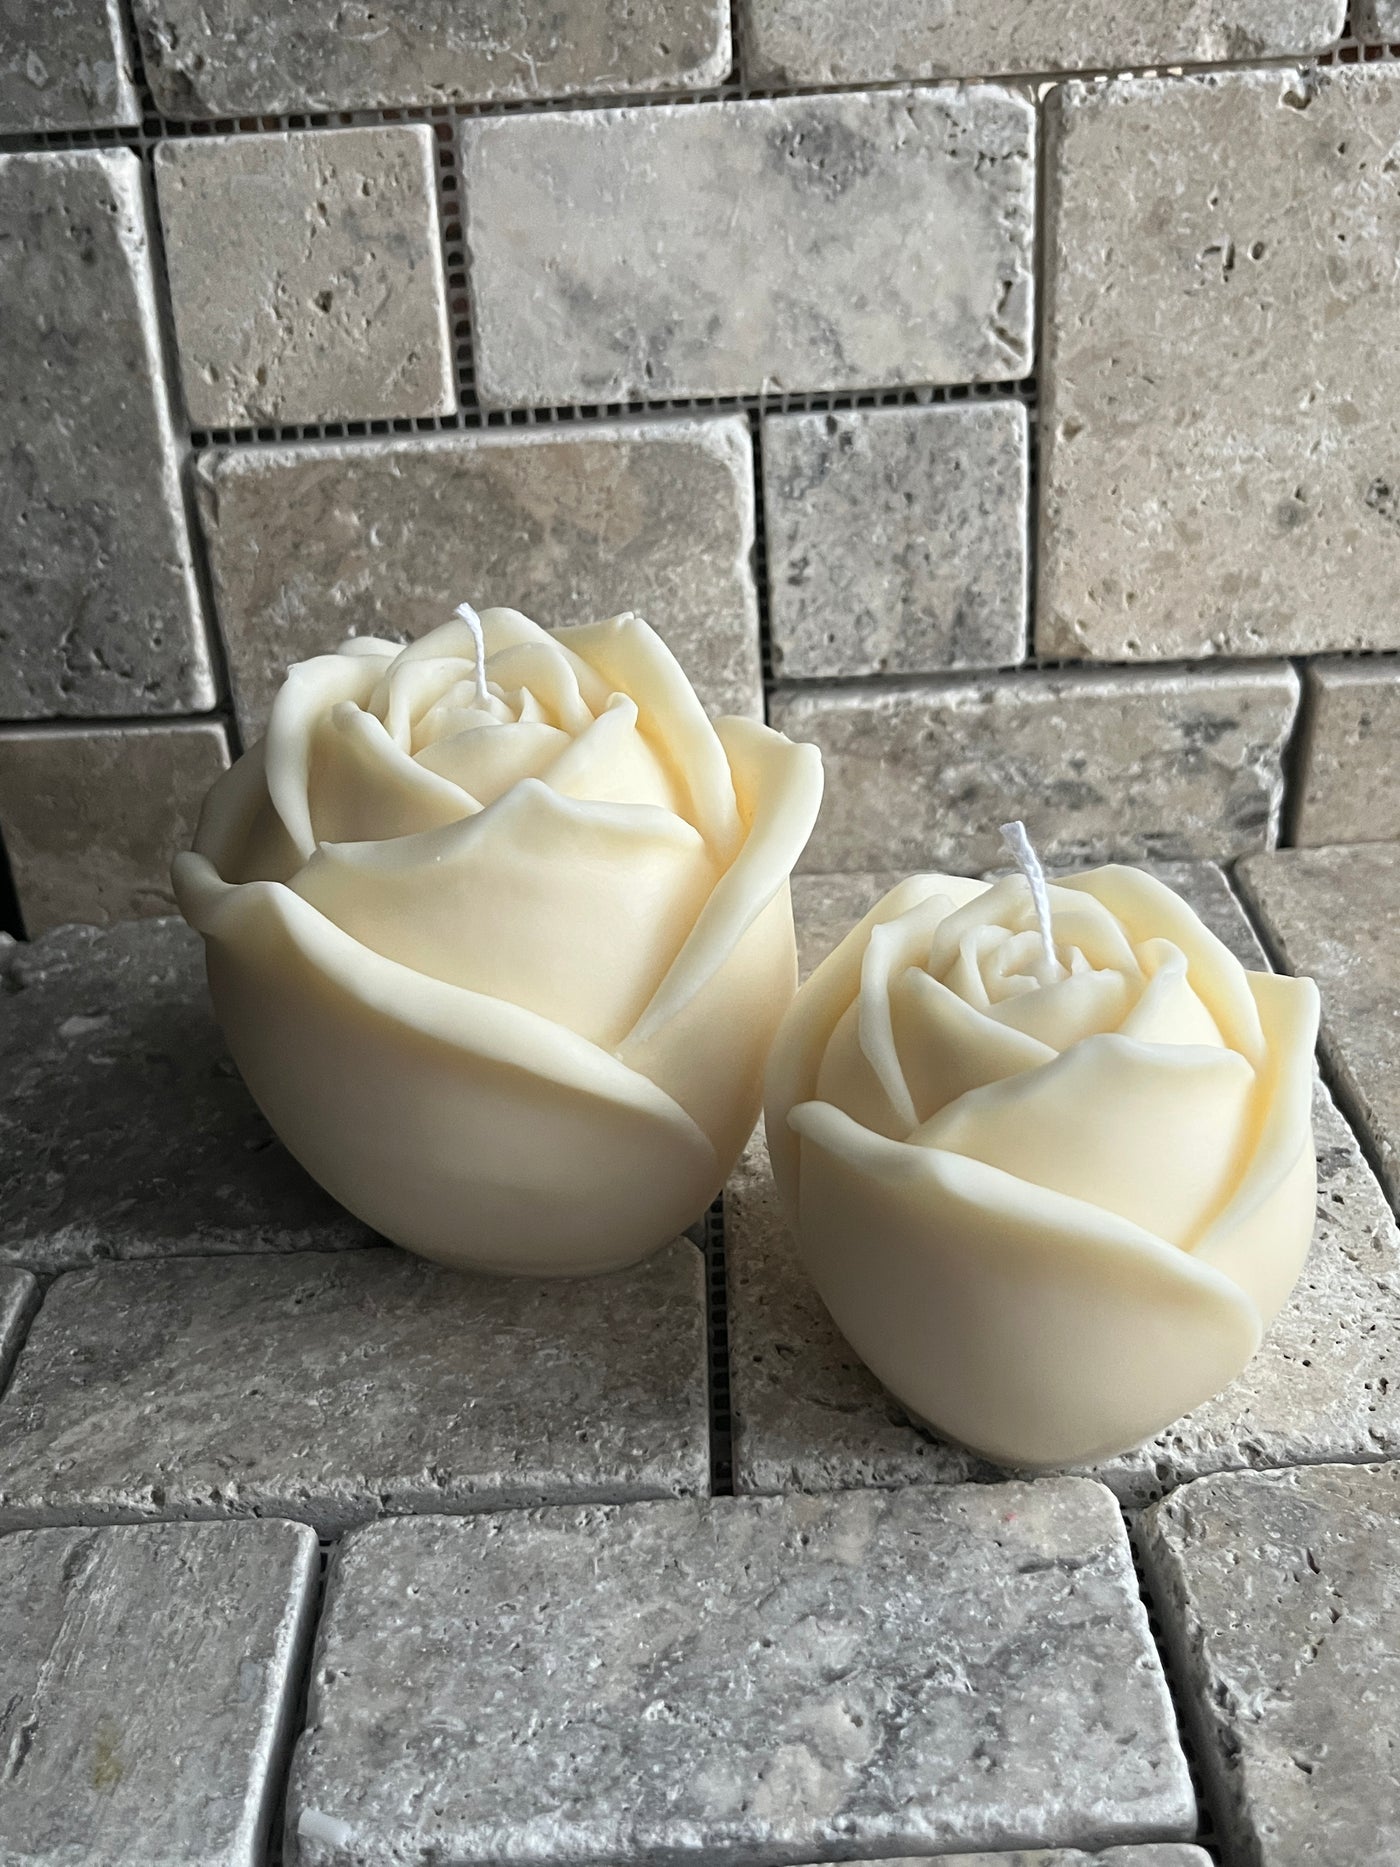 The Rose Candle | Decorative Rose Flower Candle | Mother's Day Gift